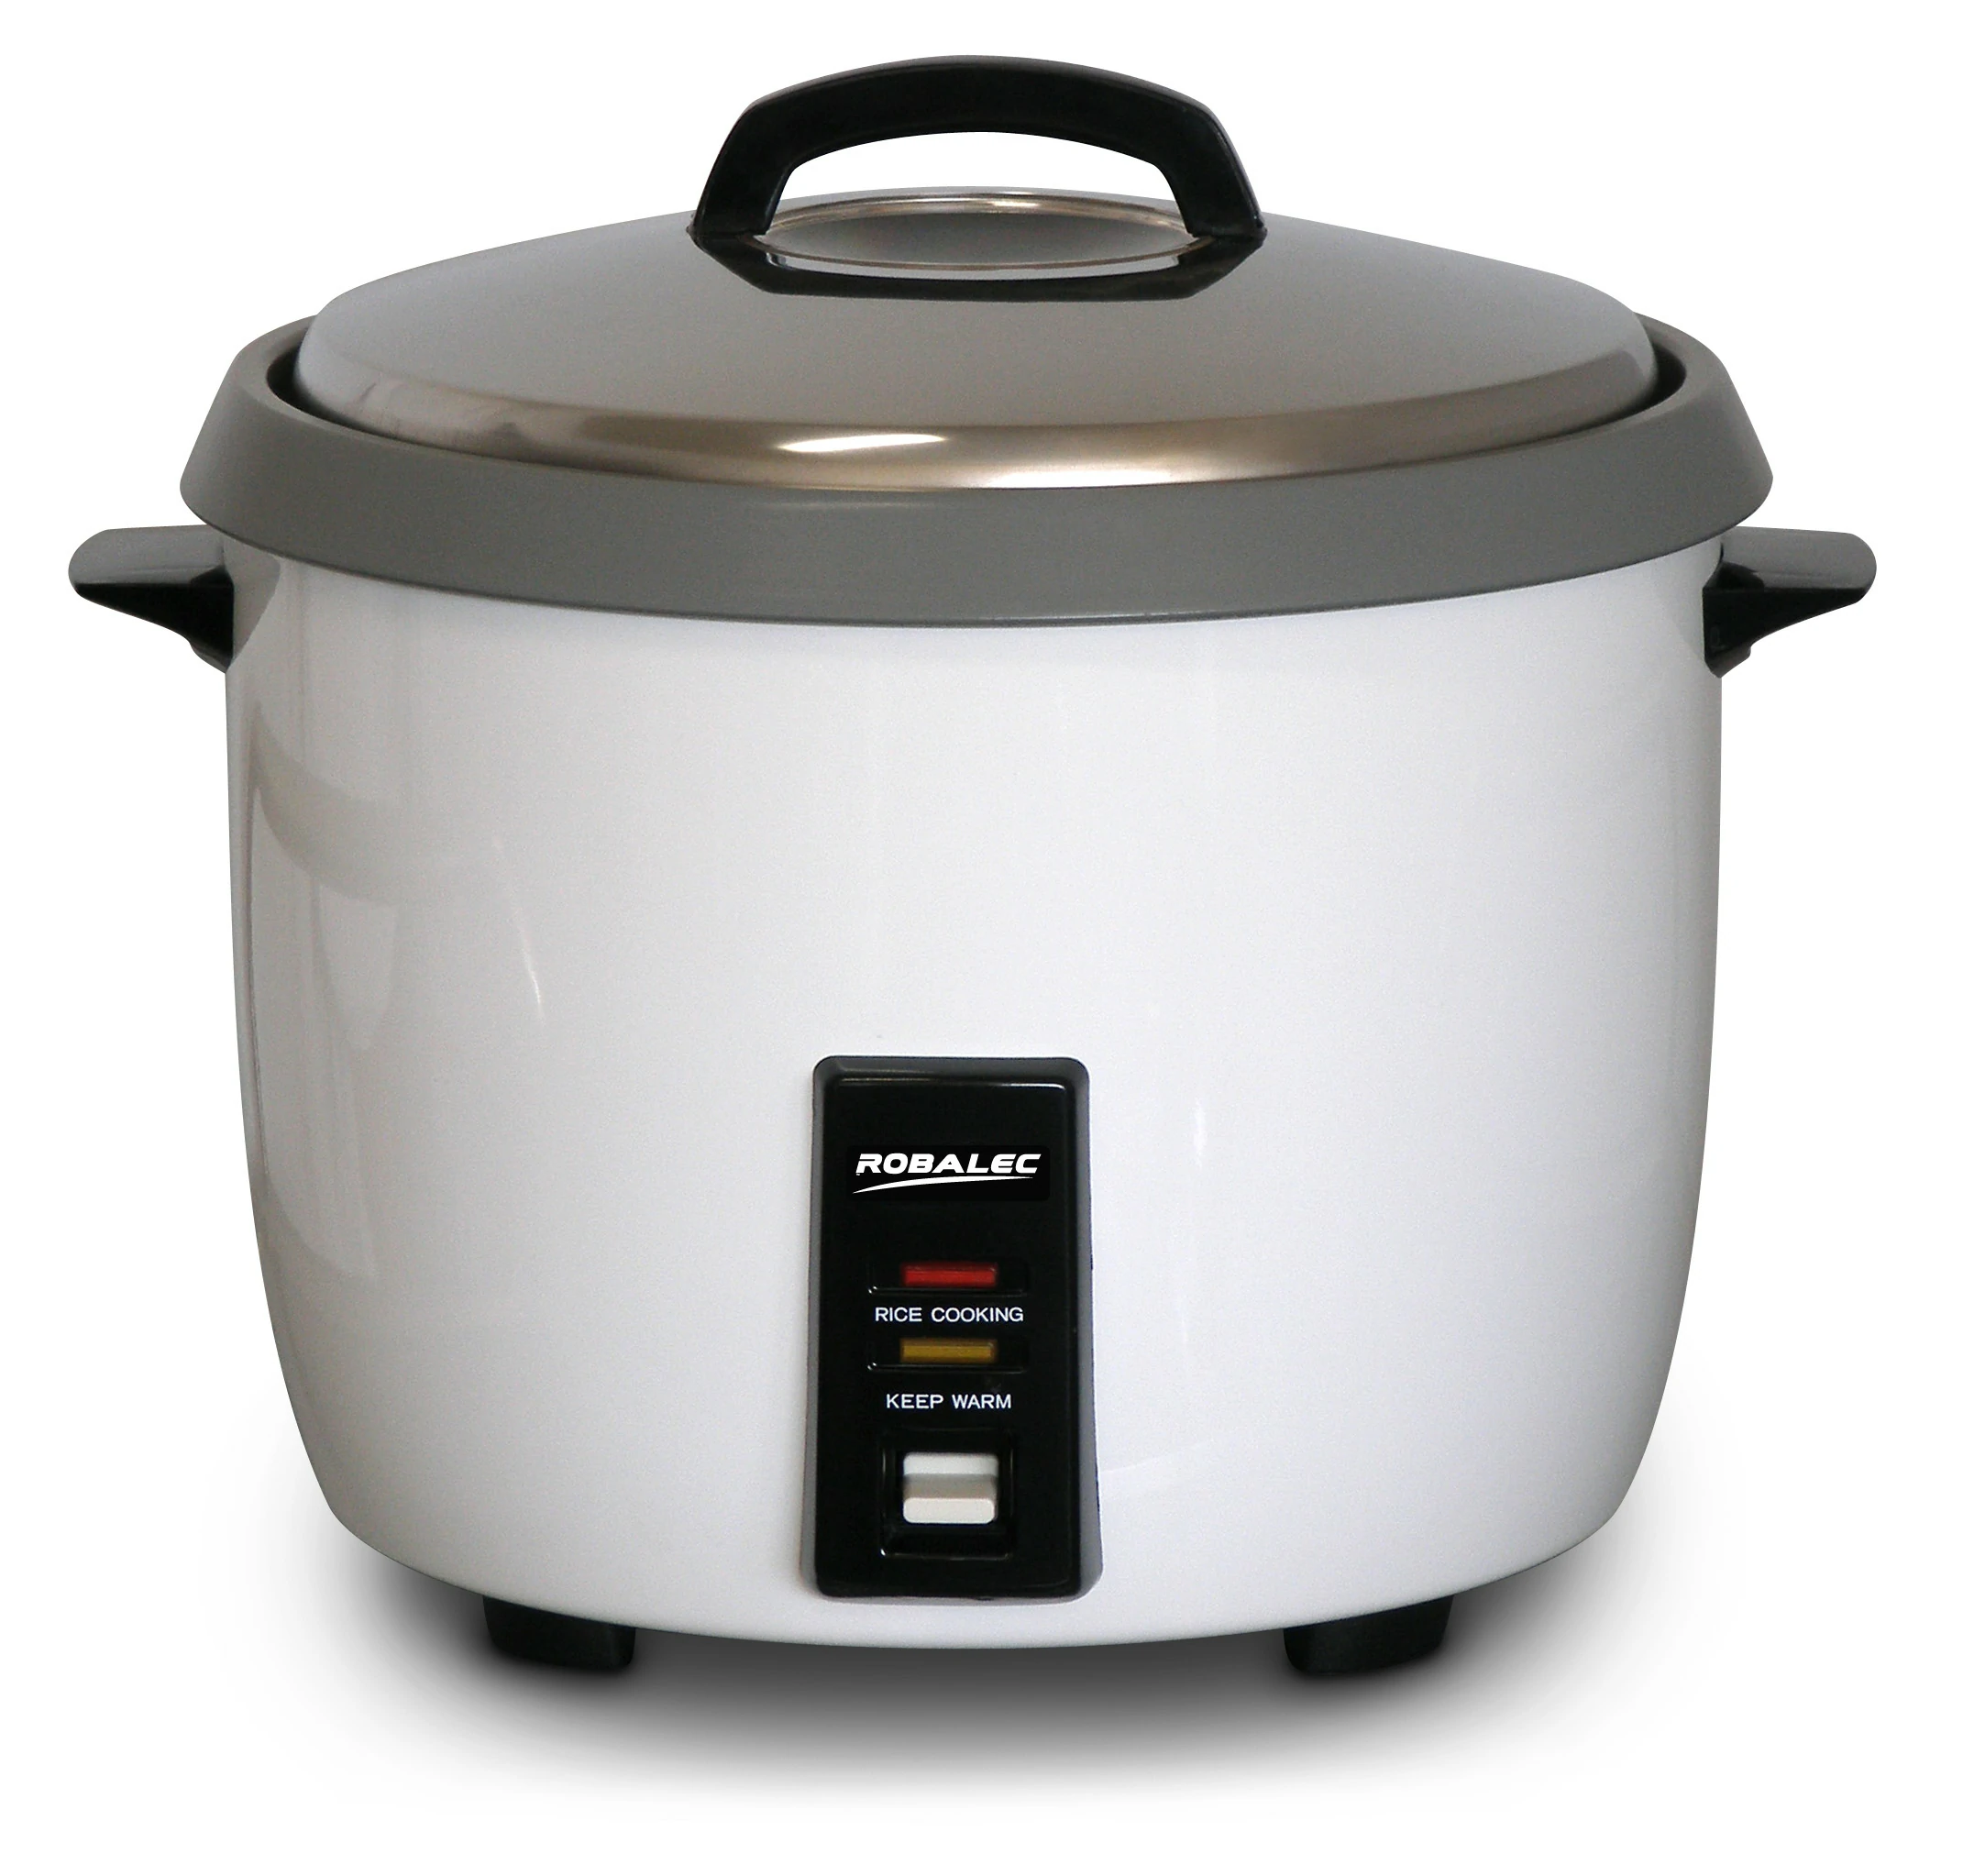 Roband Rice Cooker SW5400